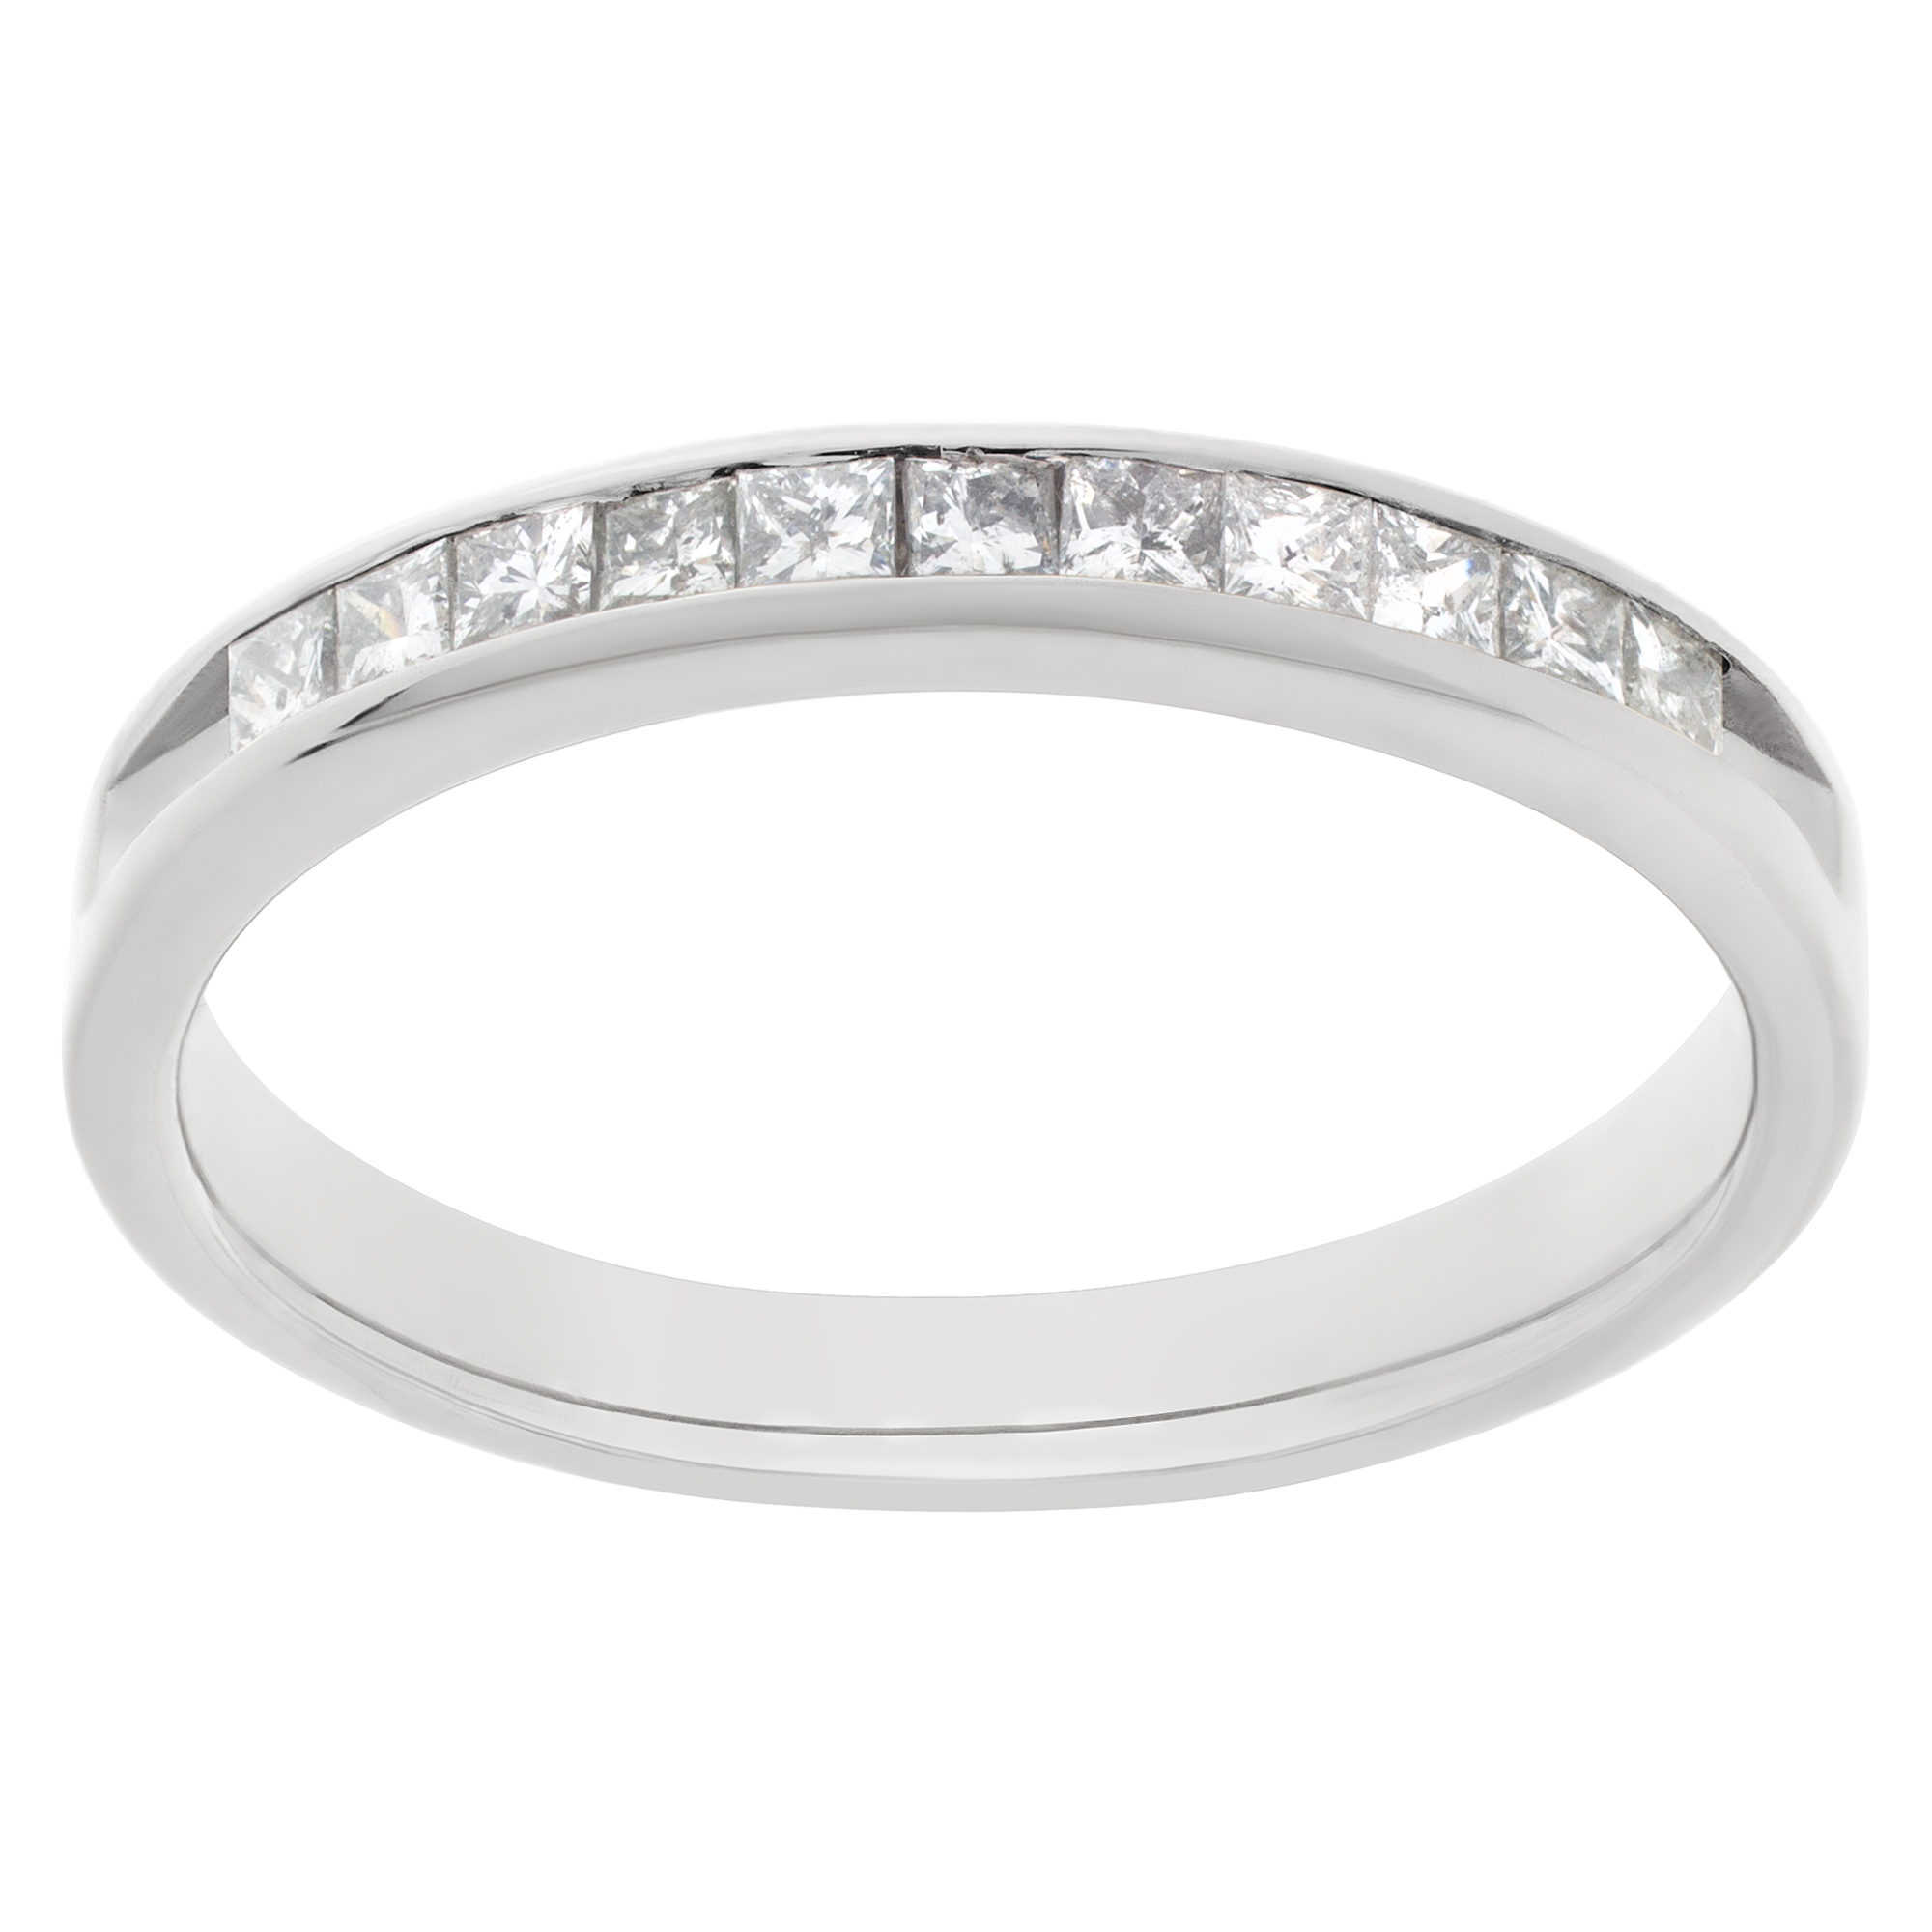 Semi Diamond Eternity Band and Ring in 14k white gold. 0.55 carats in diamonds. Size 6.25 image 1